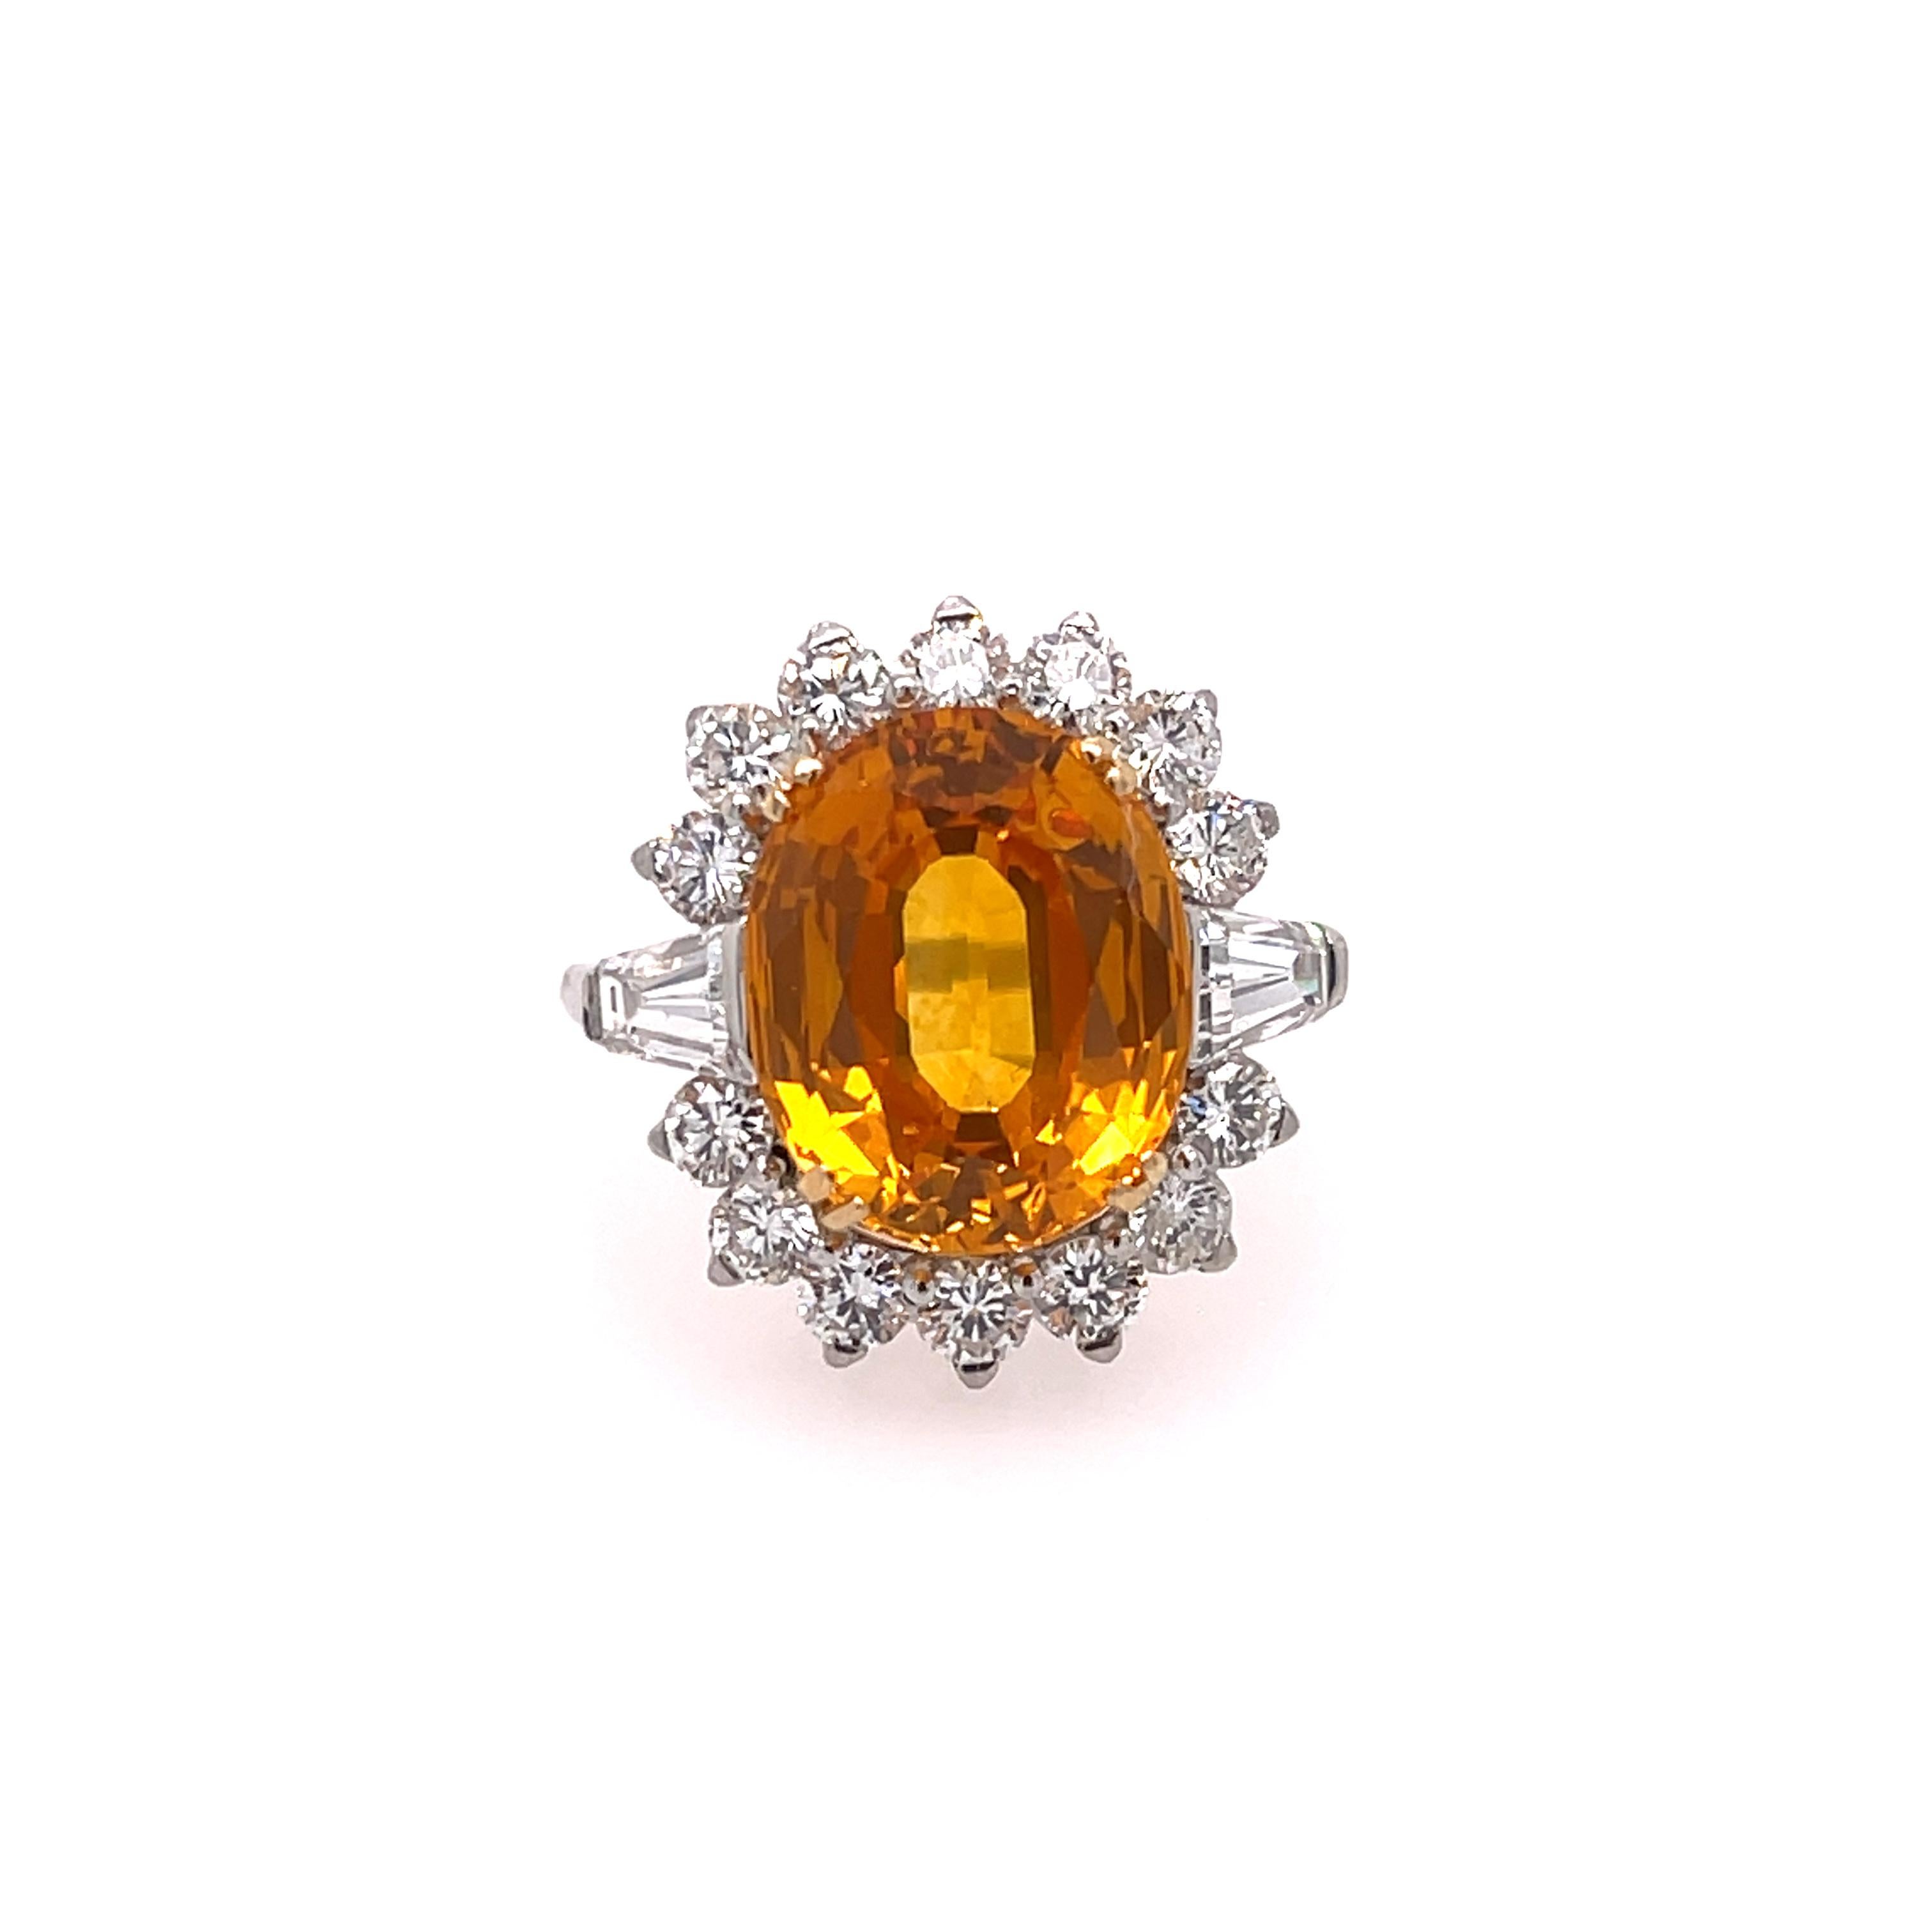 Estate Yellow Sapphire (GIA Certified) & Diamond Platinum Ring. The ring features a 7.10ct oval yellow sapphire and 1.50ctw of diamonds.  Finger size 7.50, can be sized. Circa 1960s.

7.7grams